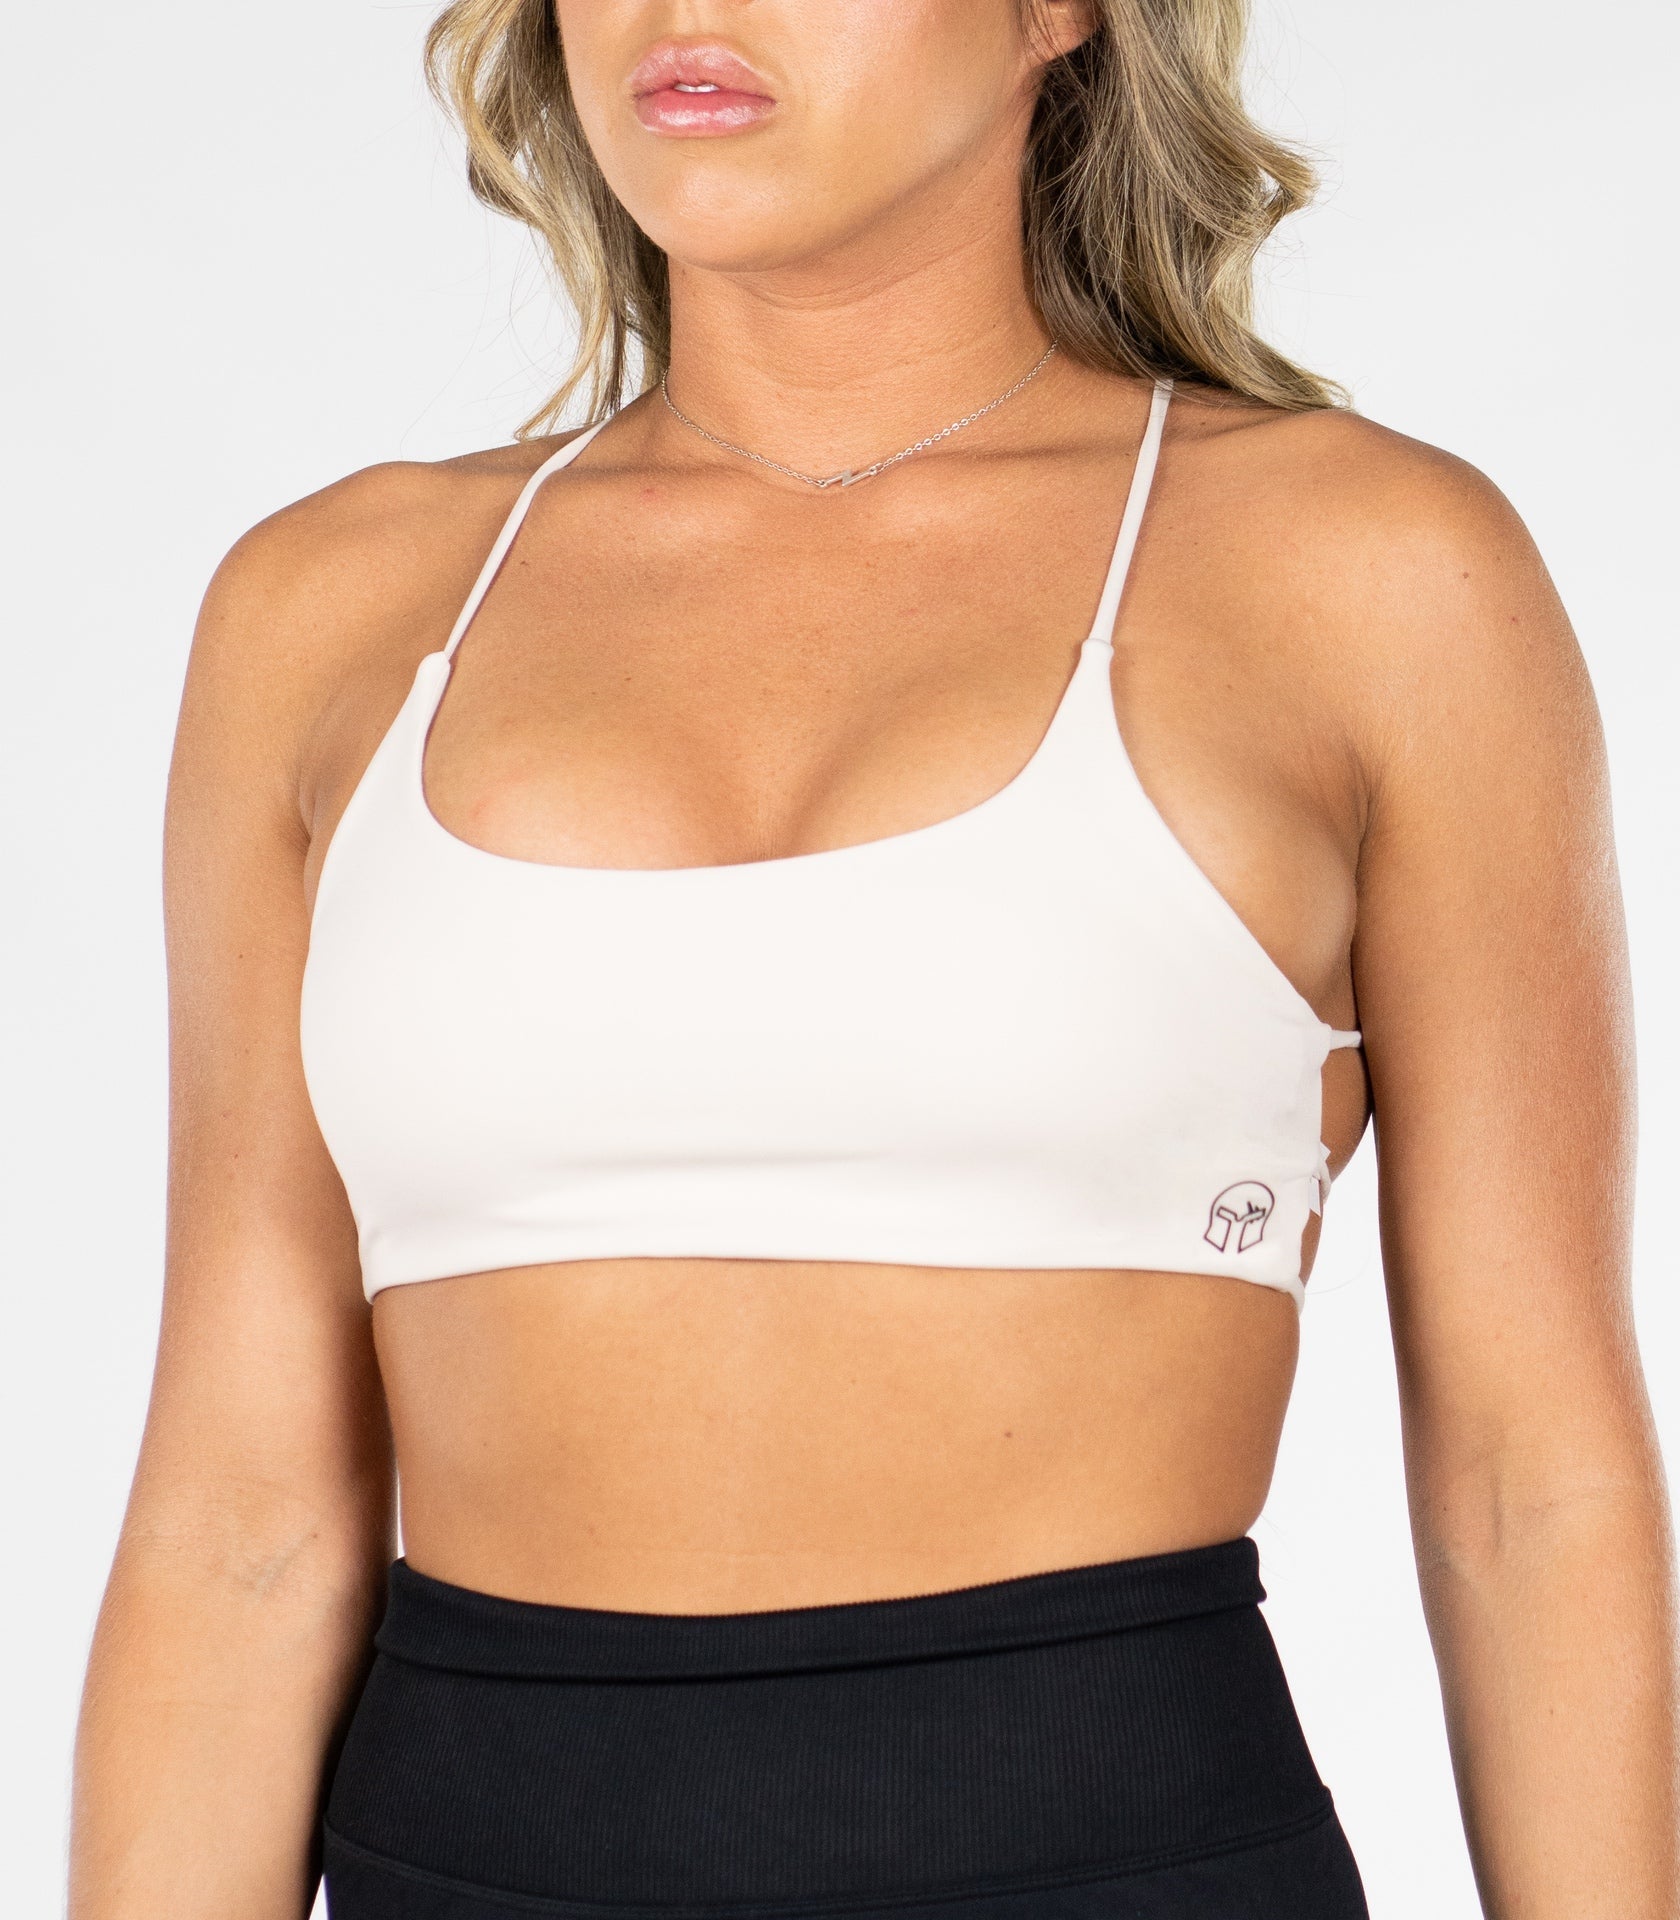 Comfort and style, all-in-one sports bra!✓ I got this typography